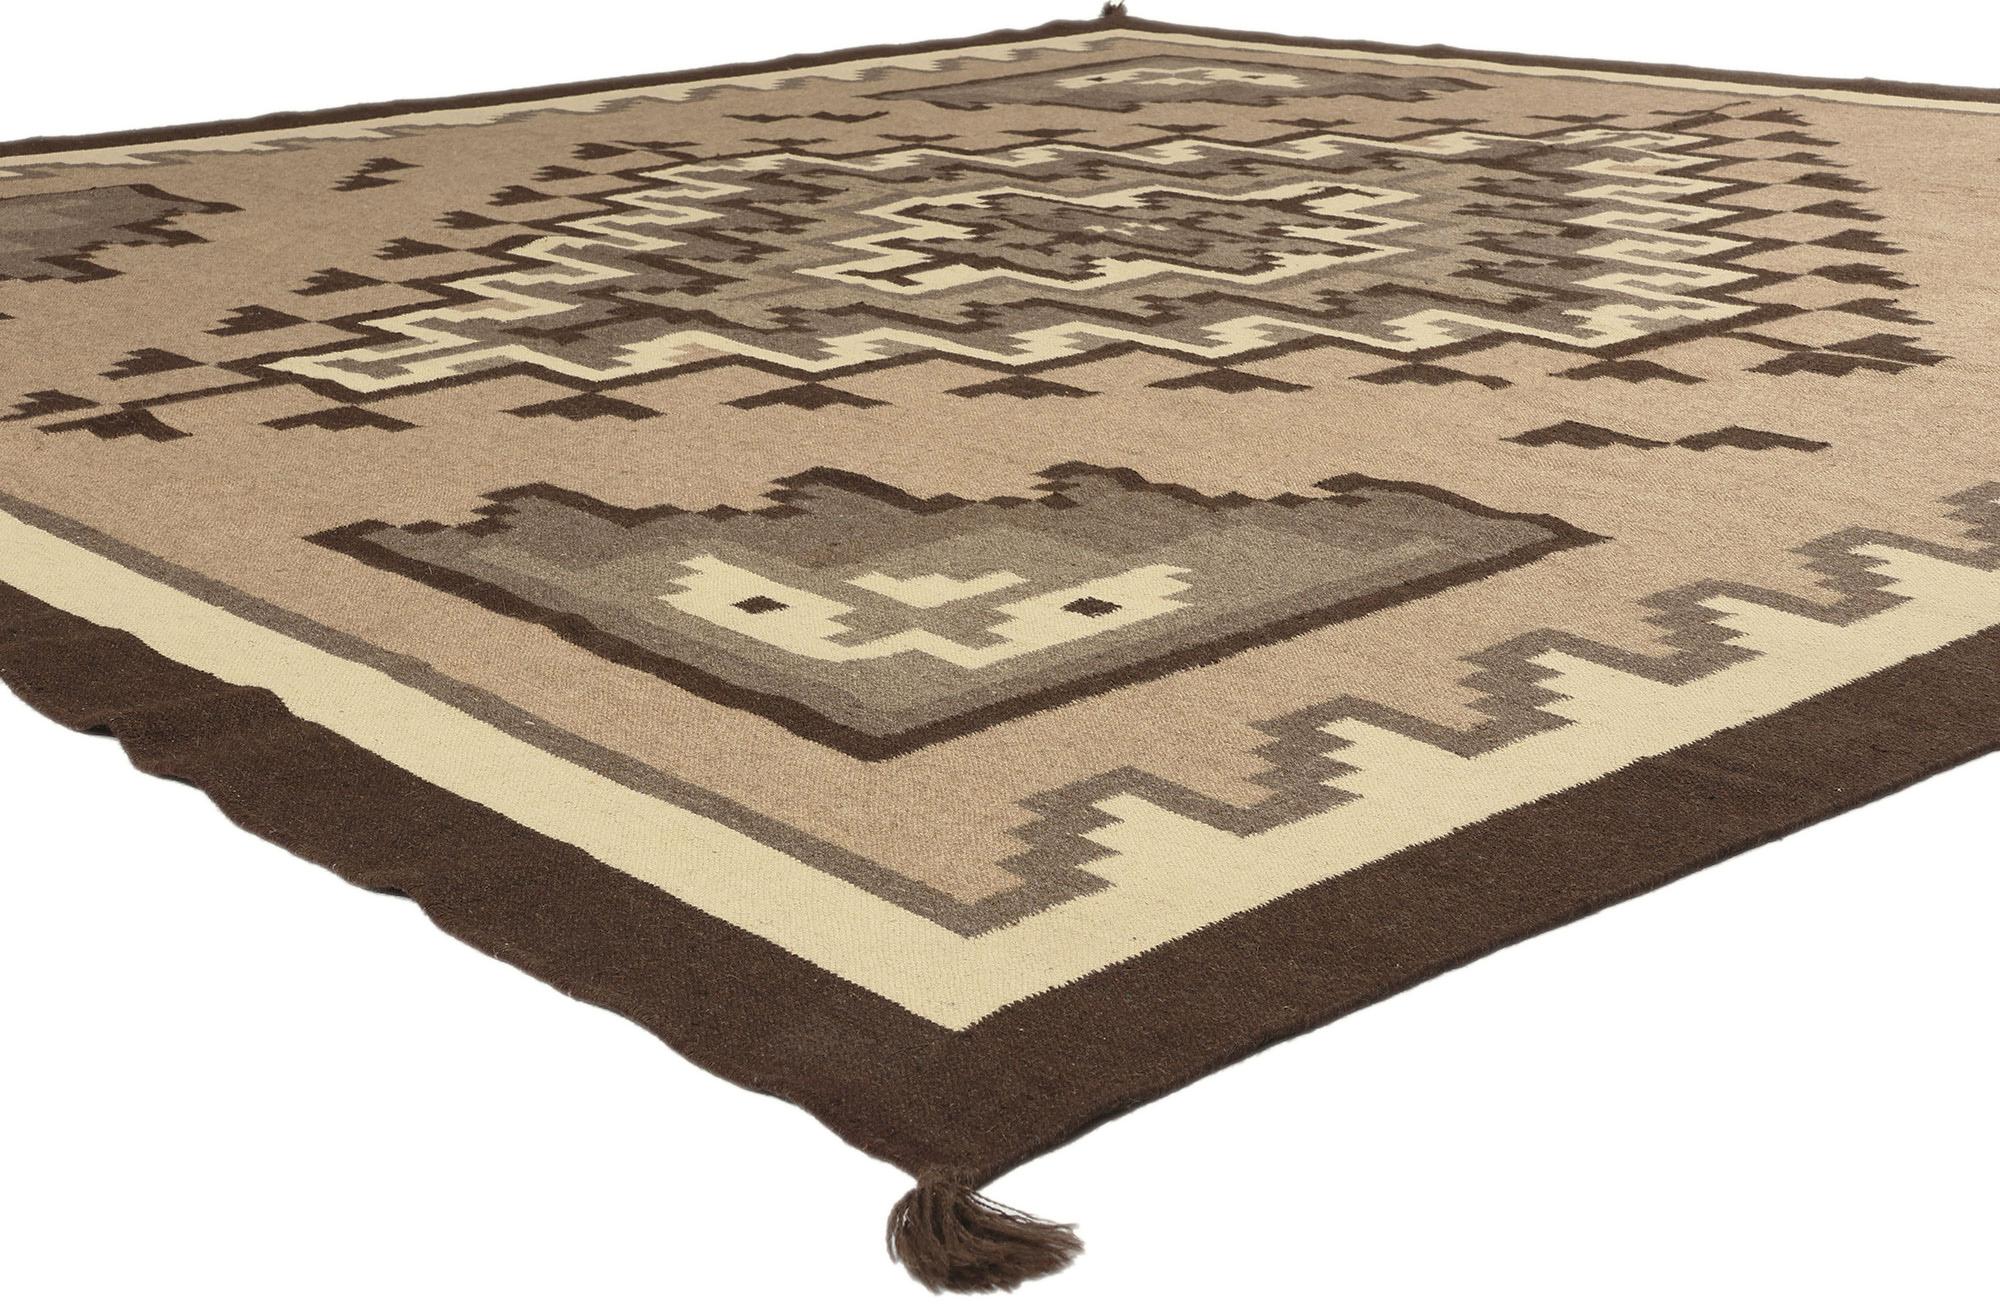 81039 Southwest Modern Two Grey Hills Navajo-Style Rug, 10'01 x 10'00. Immerse yourself in the harmonious marriage of Organic Modern and the subtle elegance of Two Grey Hills Navajo design woven into this meticulous rug. The allure of the